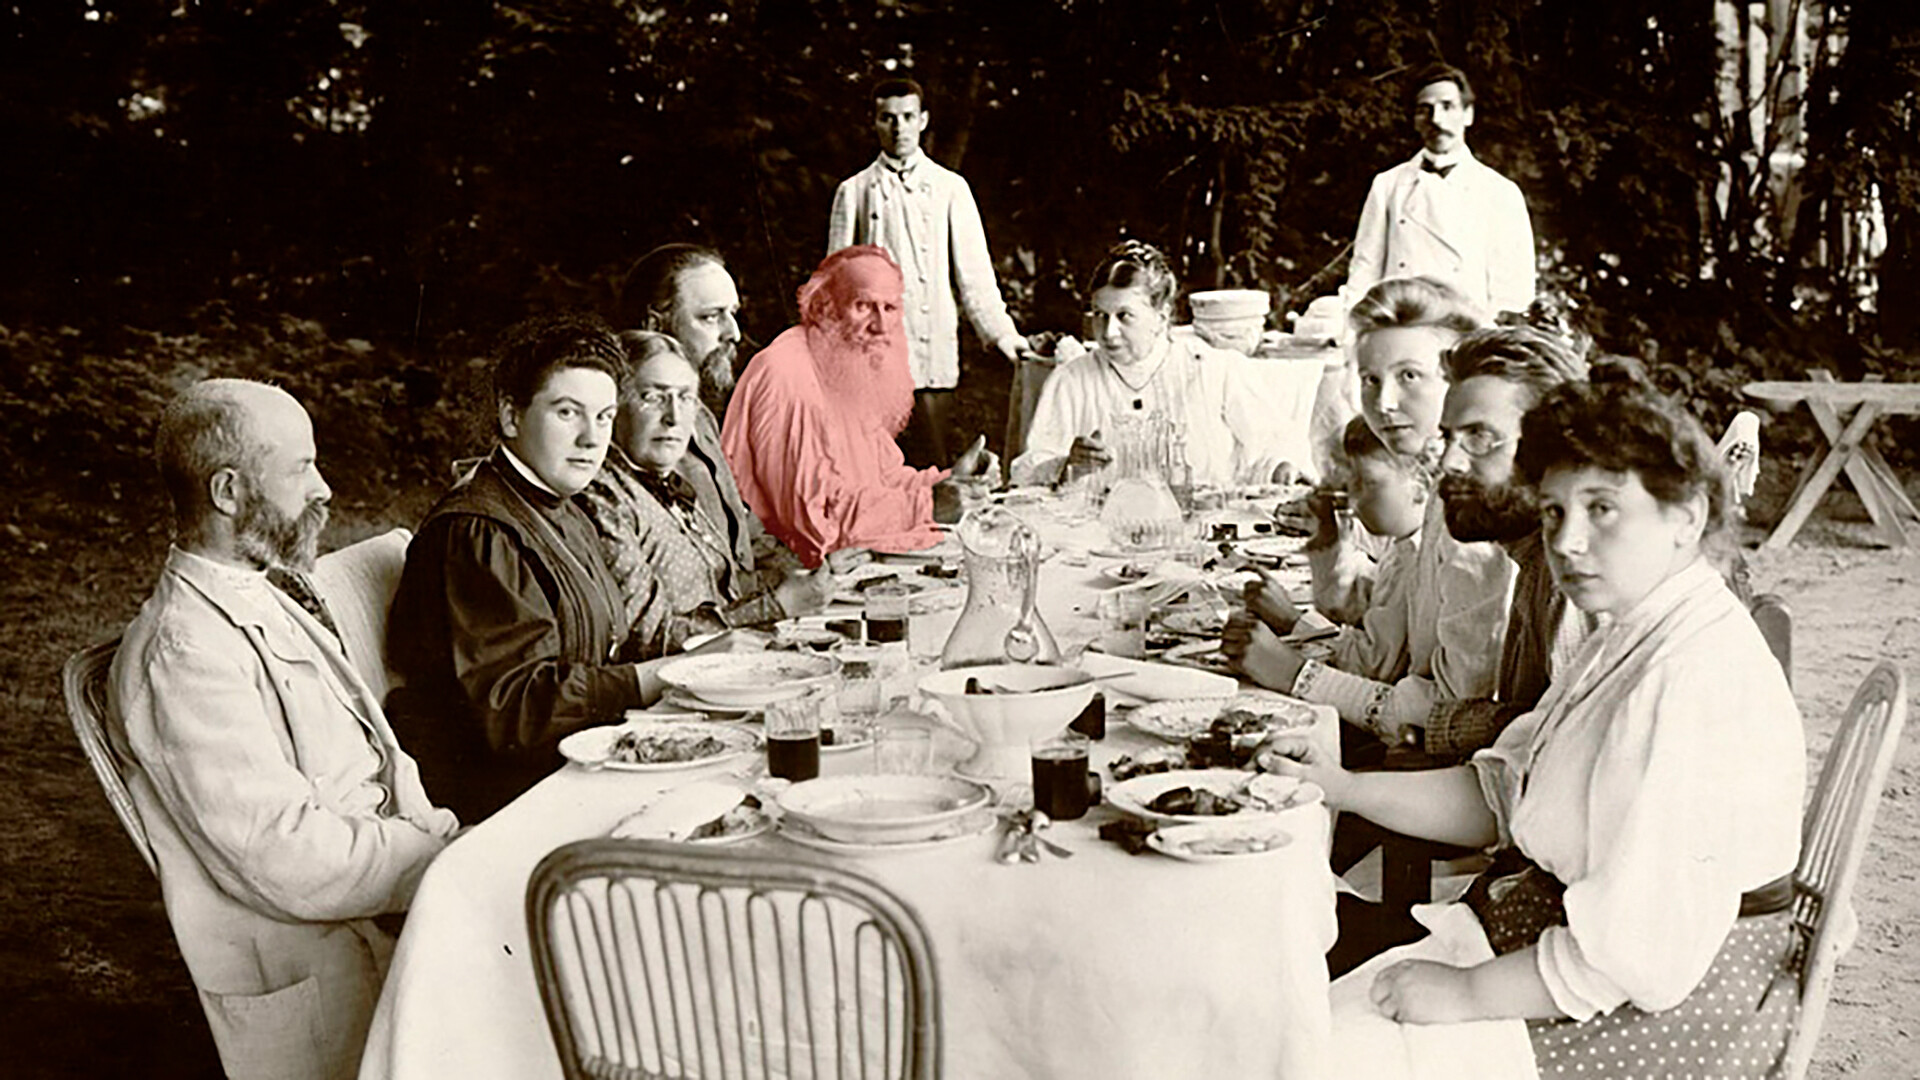 Leo Tolstoy with friends and family taking lunch at Yasnaya Polyana estate. July 7, 1908